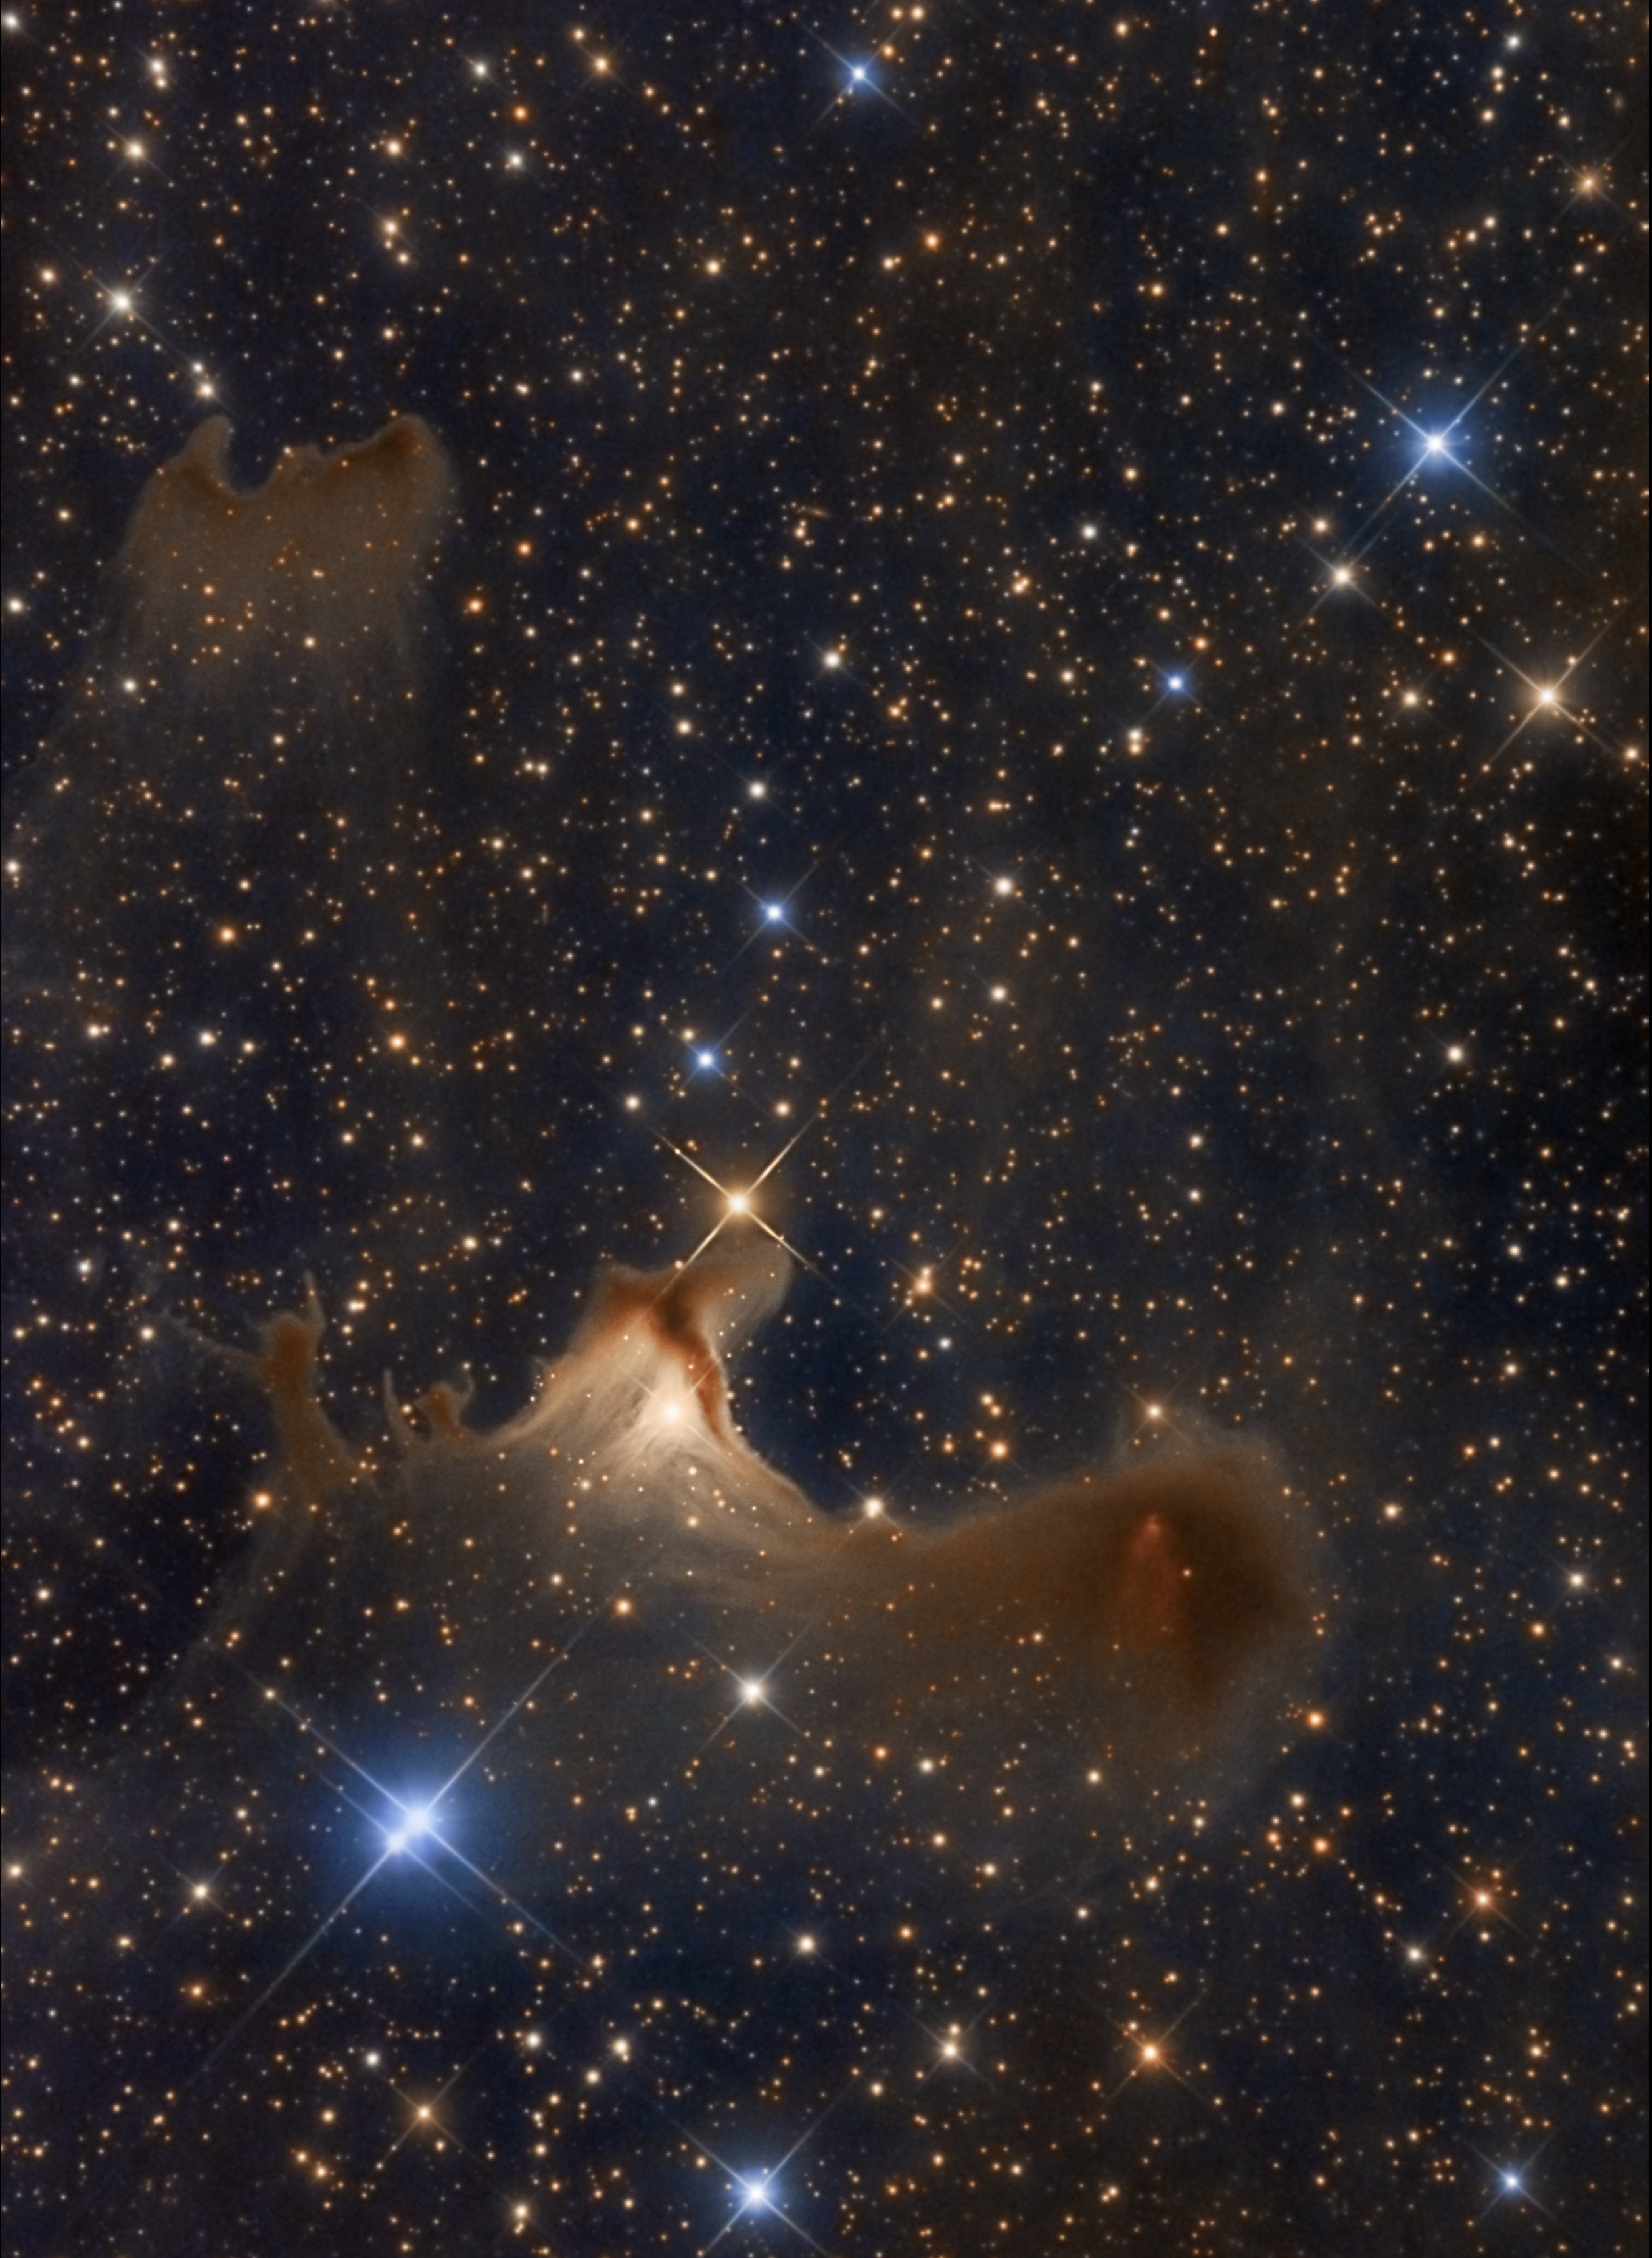 Ghost of the Cepheus Flare